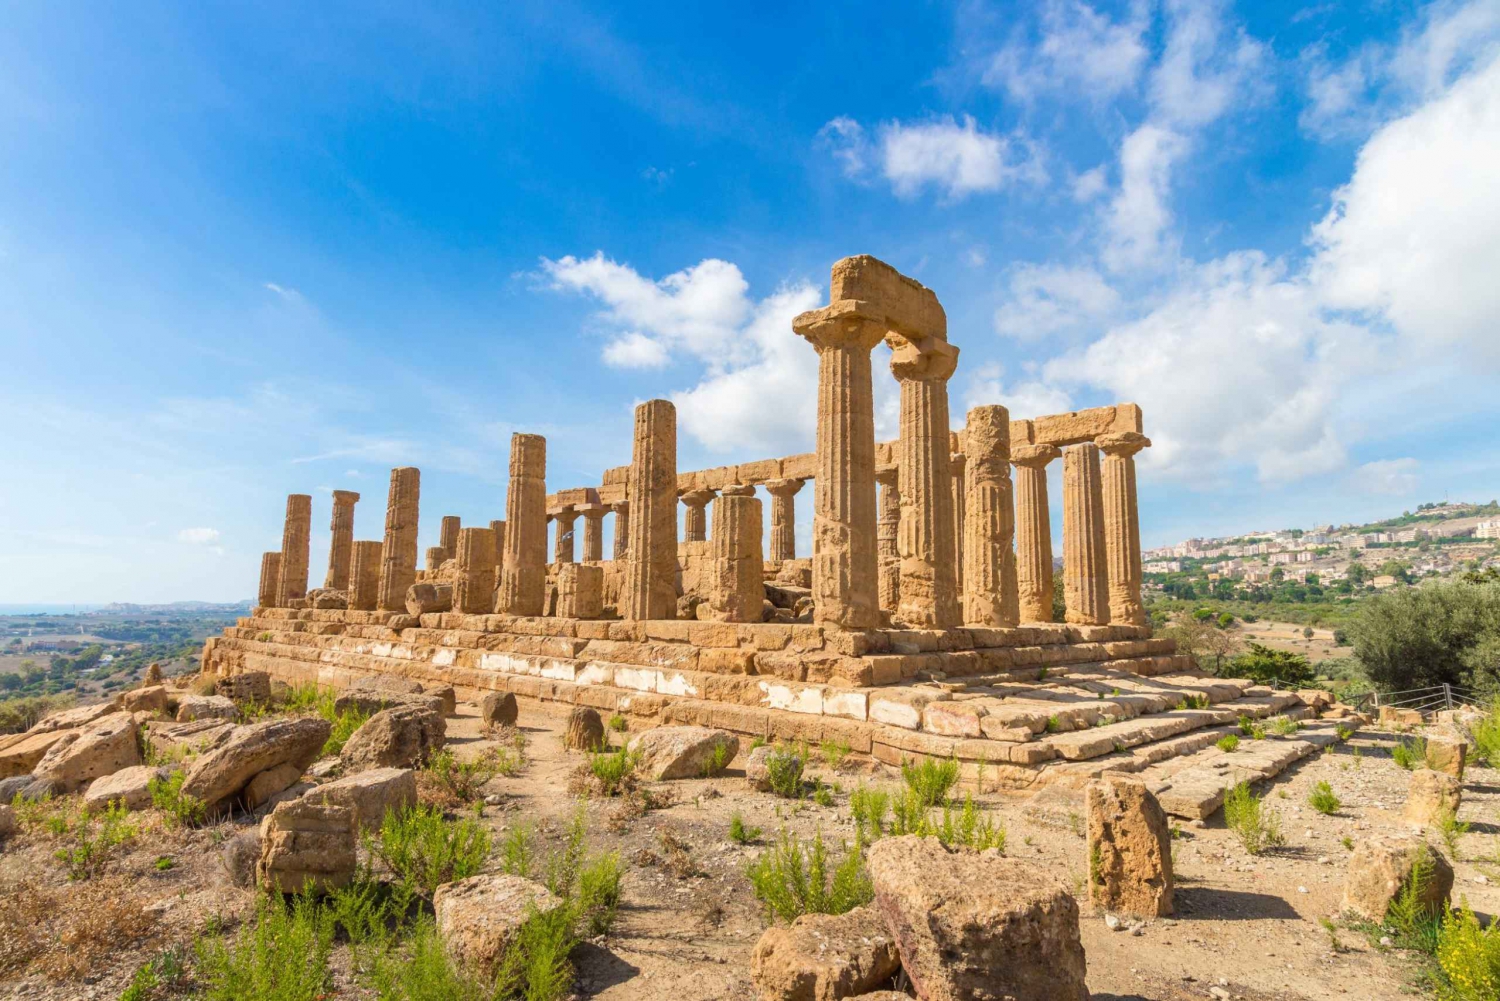 Agrigento: Valley of the Temples Entrance Ticket & Pemcards